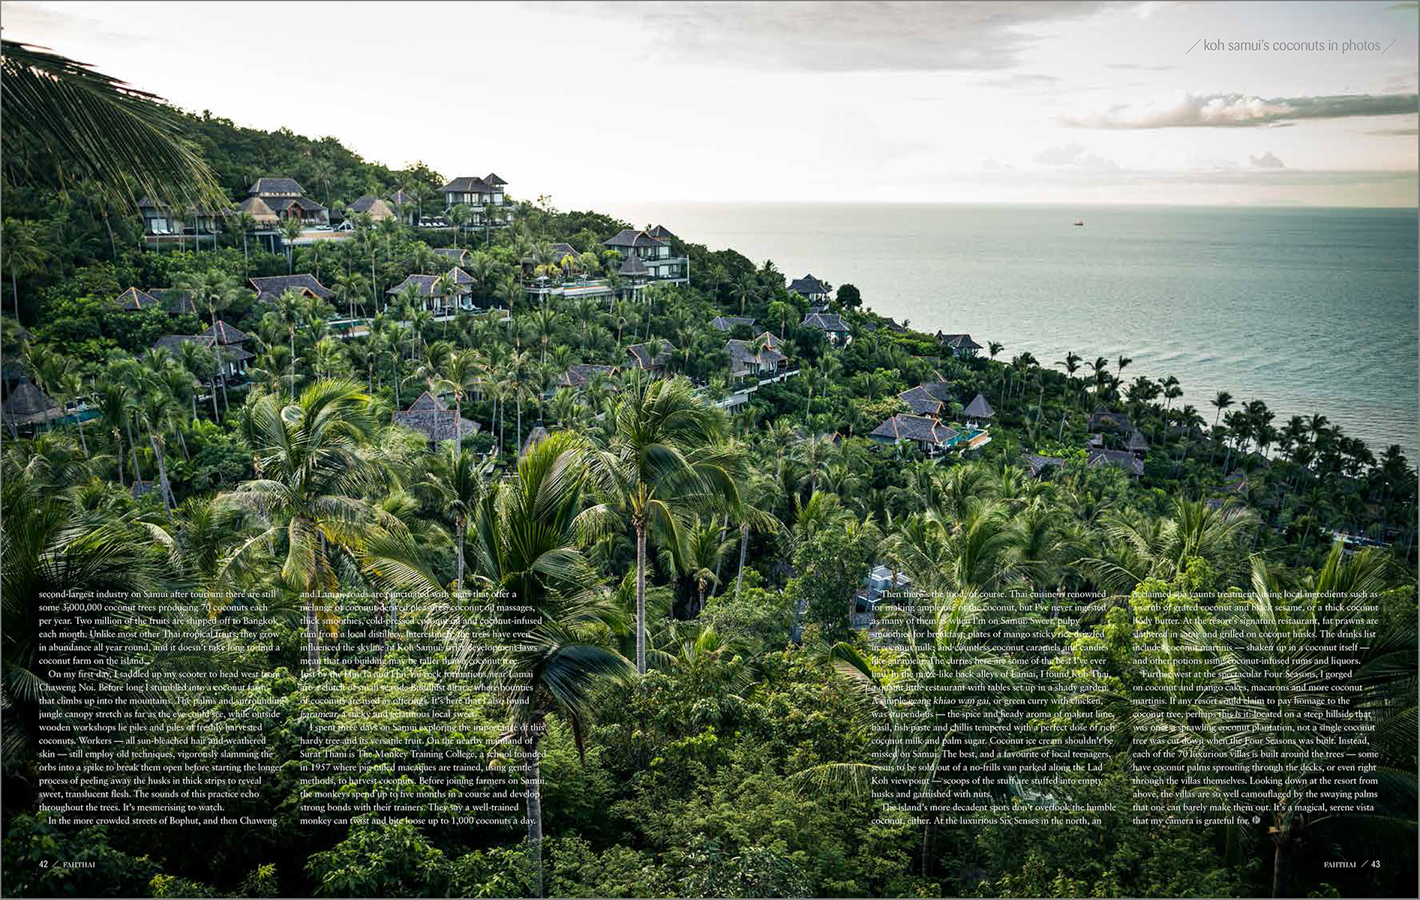 A feature travel story and photo essay on Ko Samui's coconut trade.